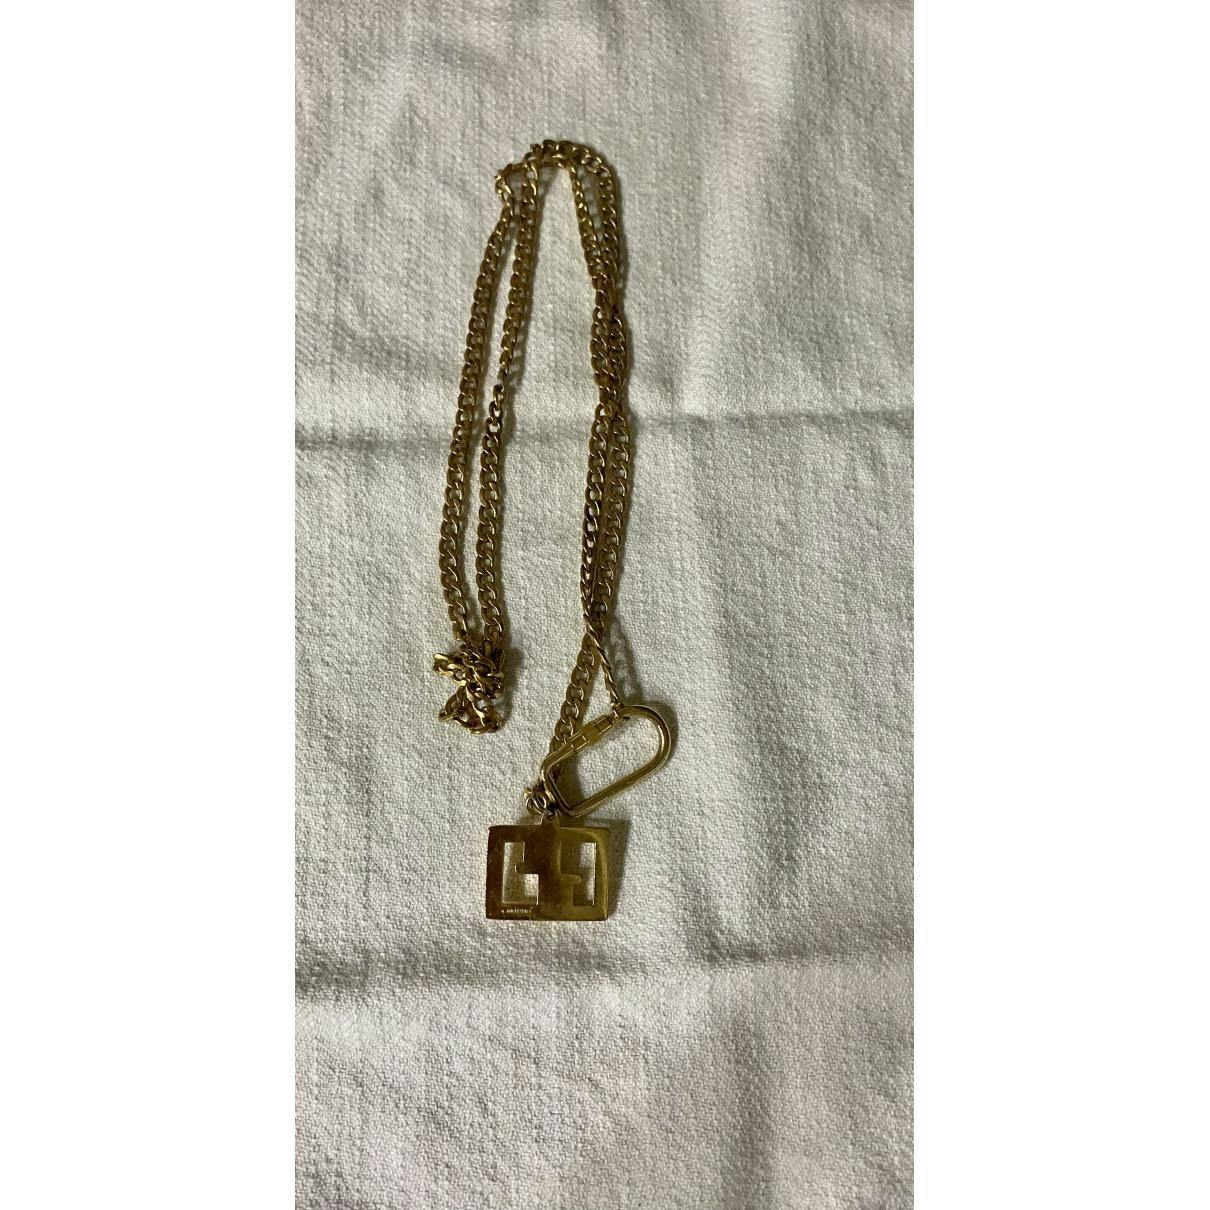 https://images.vestiairecollective.com/cdn-cgi/image/q=75,f=auto,/produit/gold-gold-plated-gg-running-gucci-necklace-35343107-5_2.jpg?secret=VC-e9eee96a-a819-4431-ad12-d066be2626ef